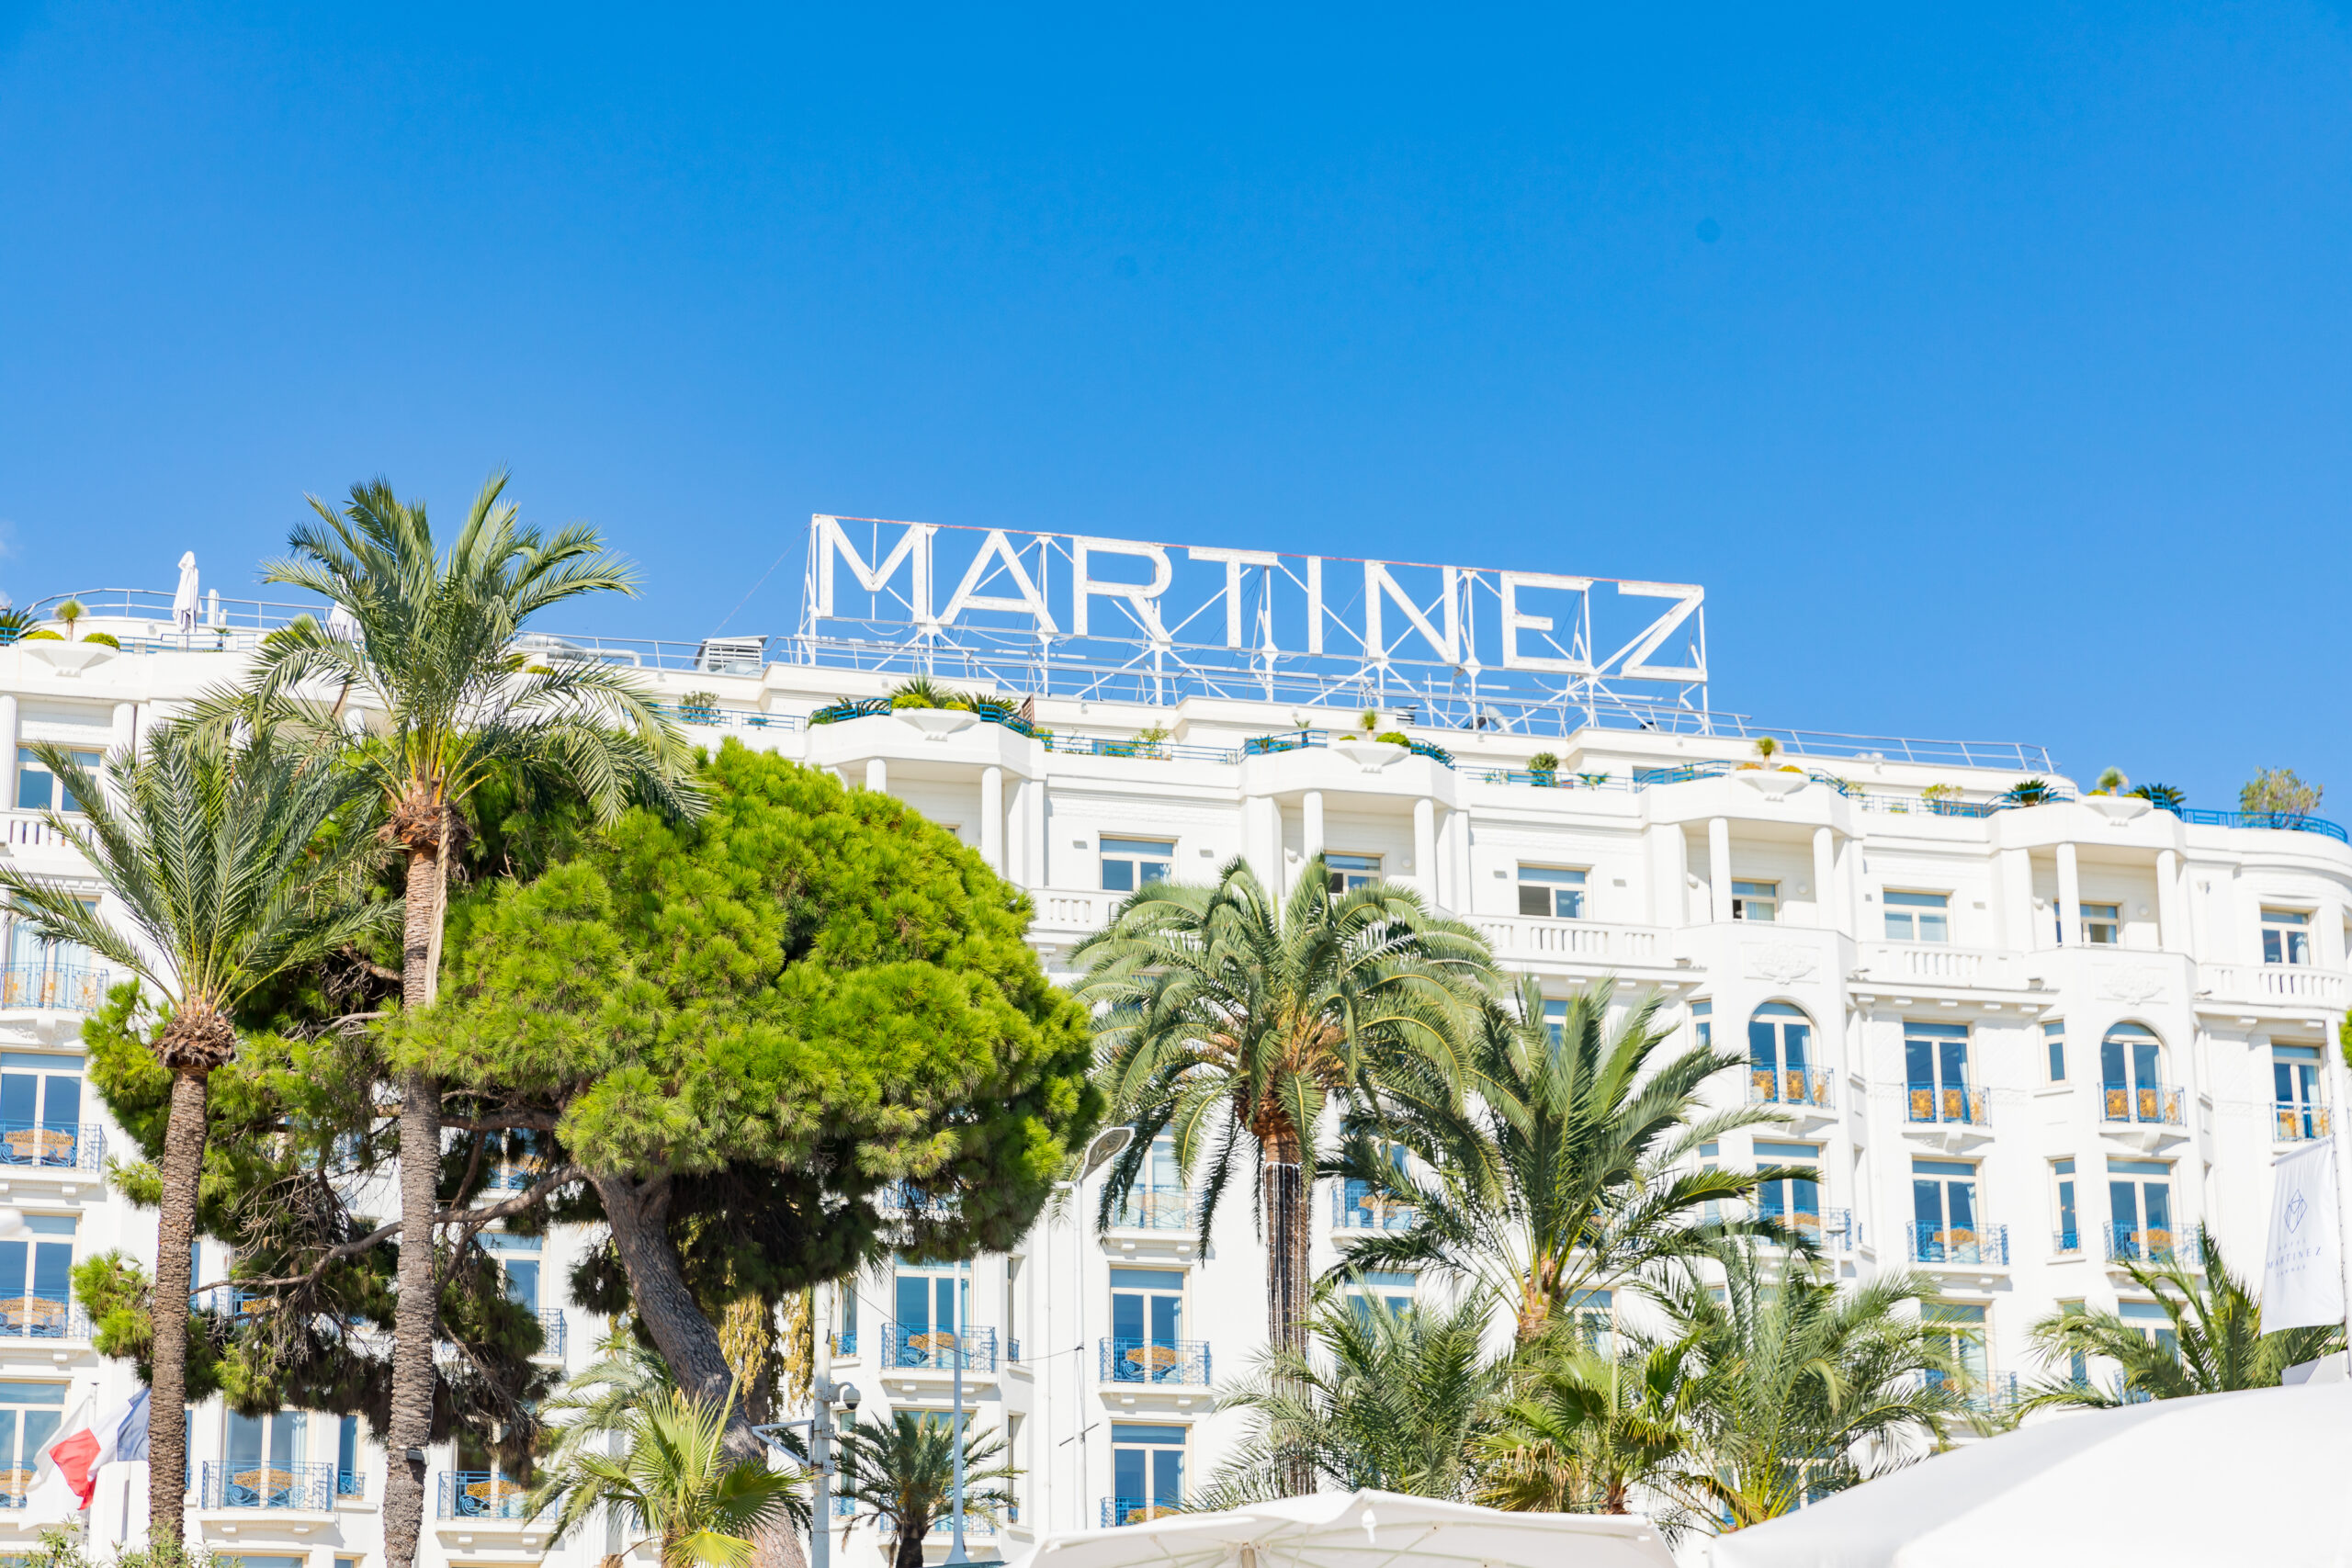 Why You Need to Stay at the Hotel Martinez in Cannes, France